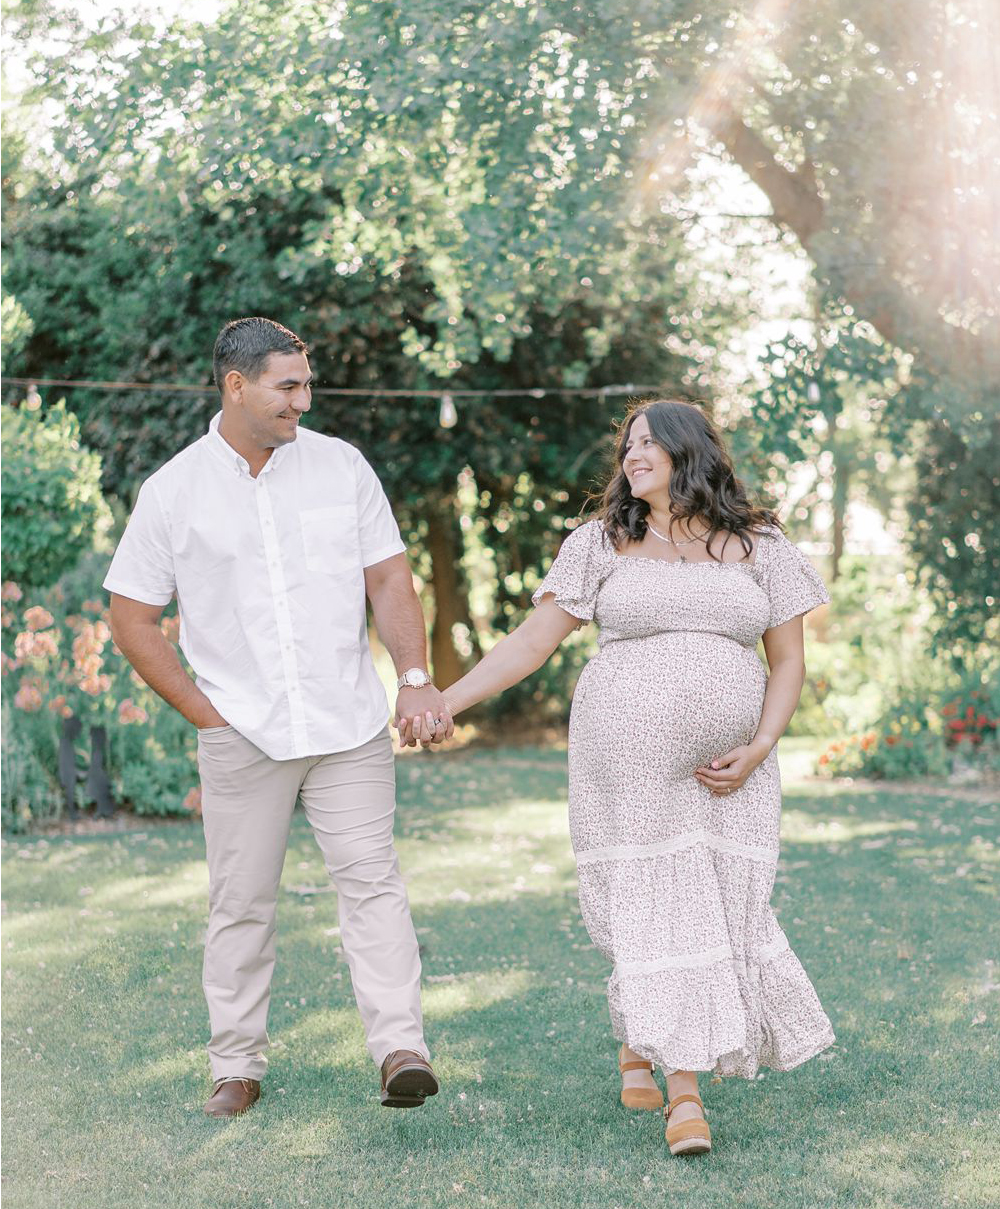 Nashville Maternity photographer Courtney Houk answers the commonly asked question "when to book maternity photos" in this blog post